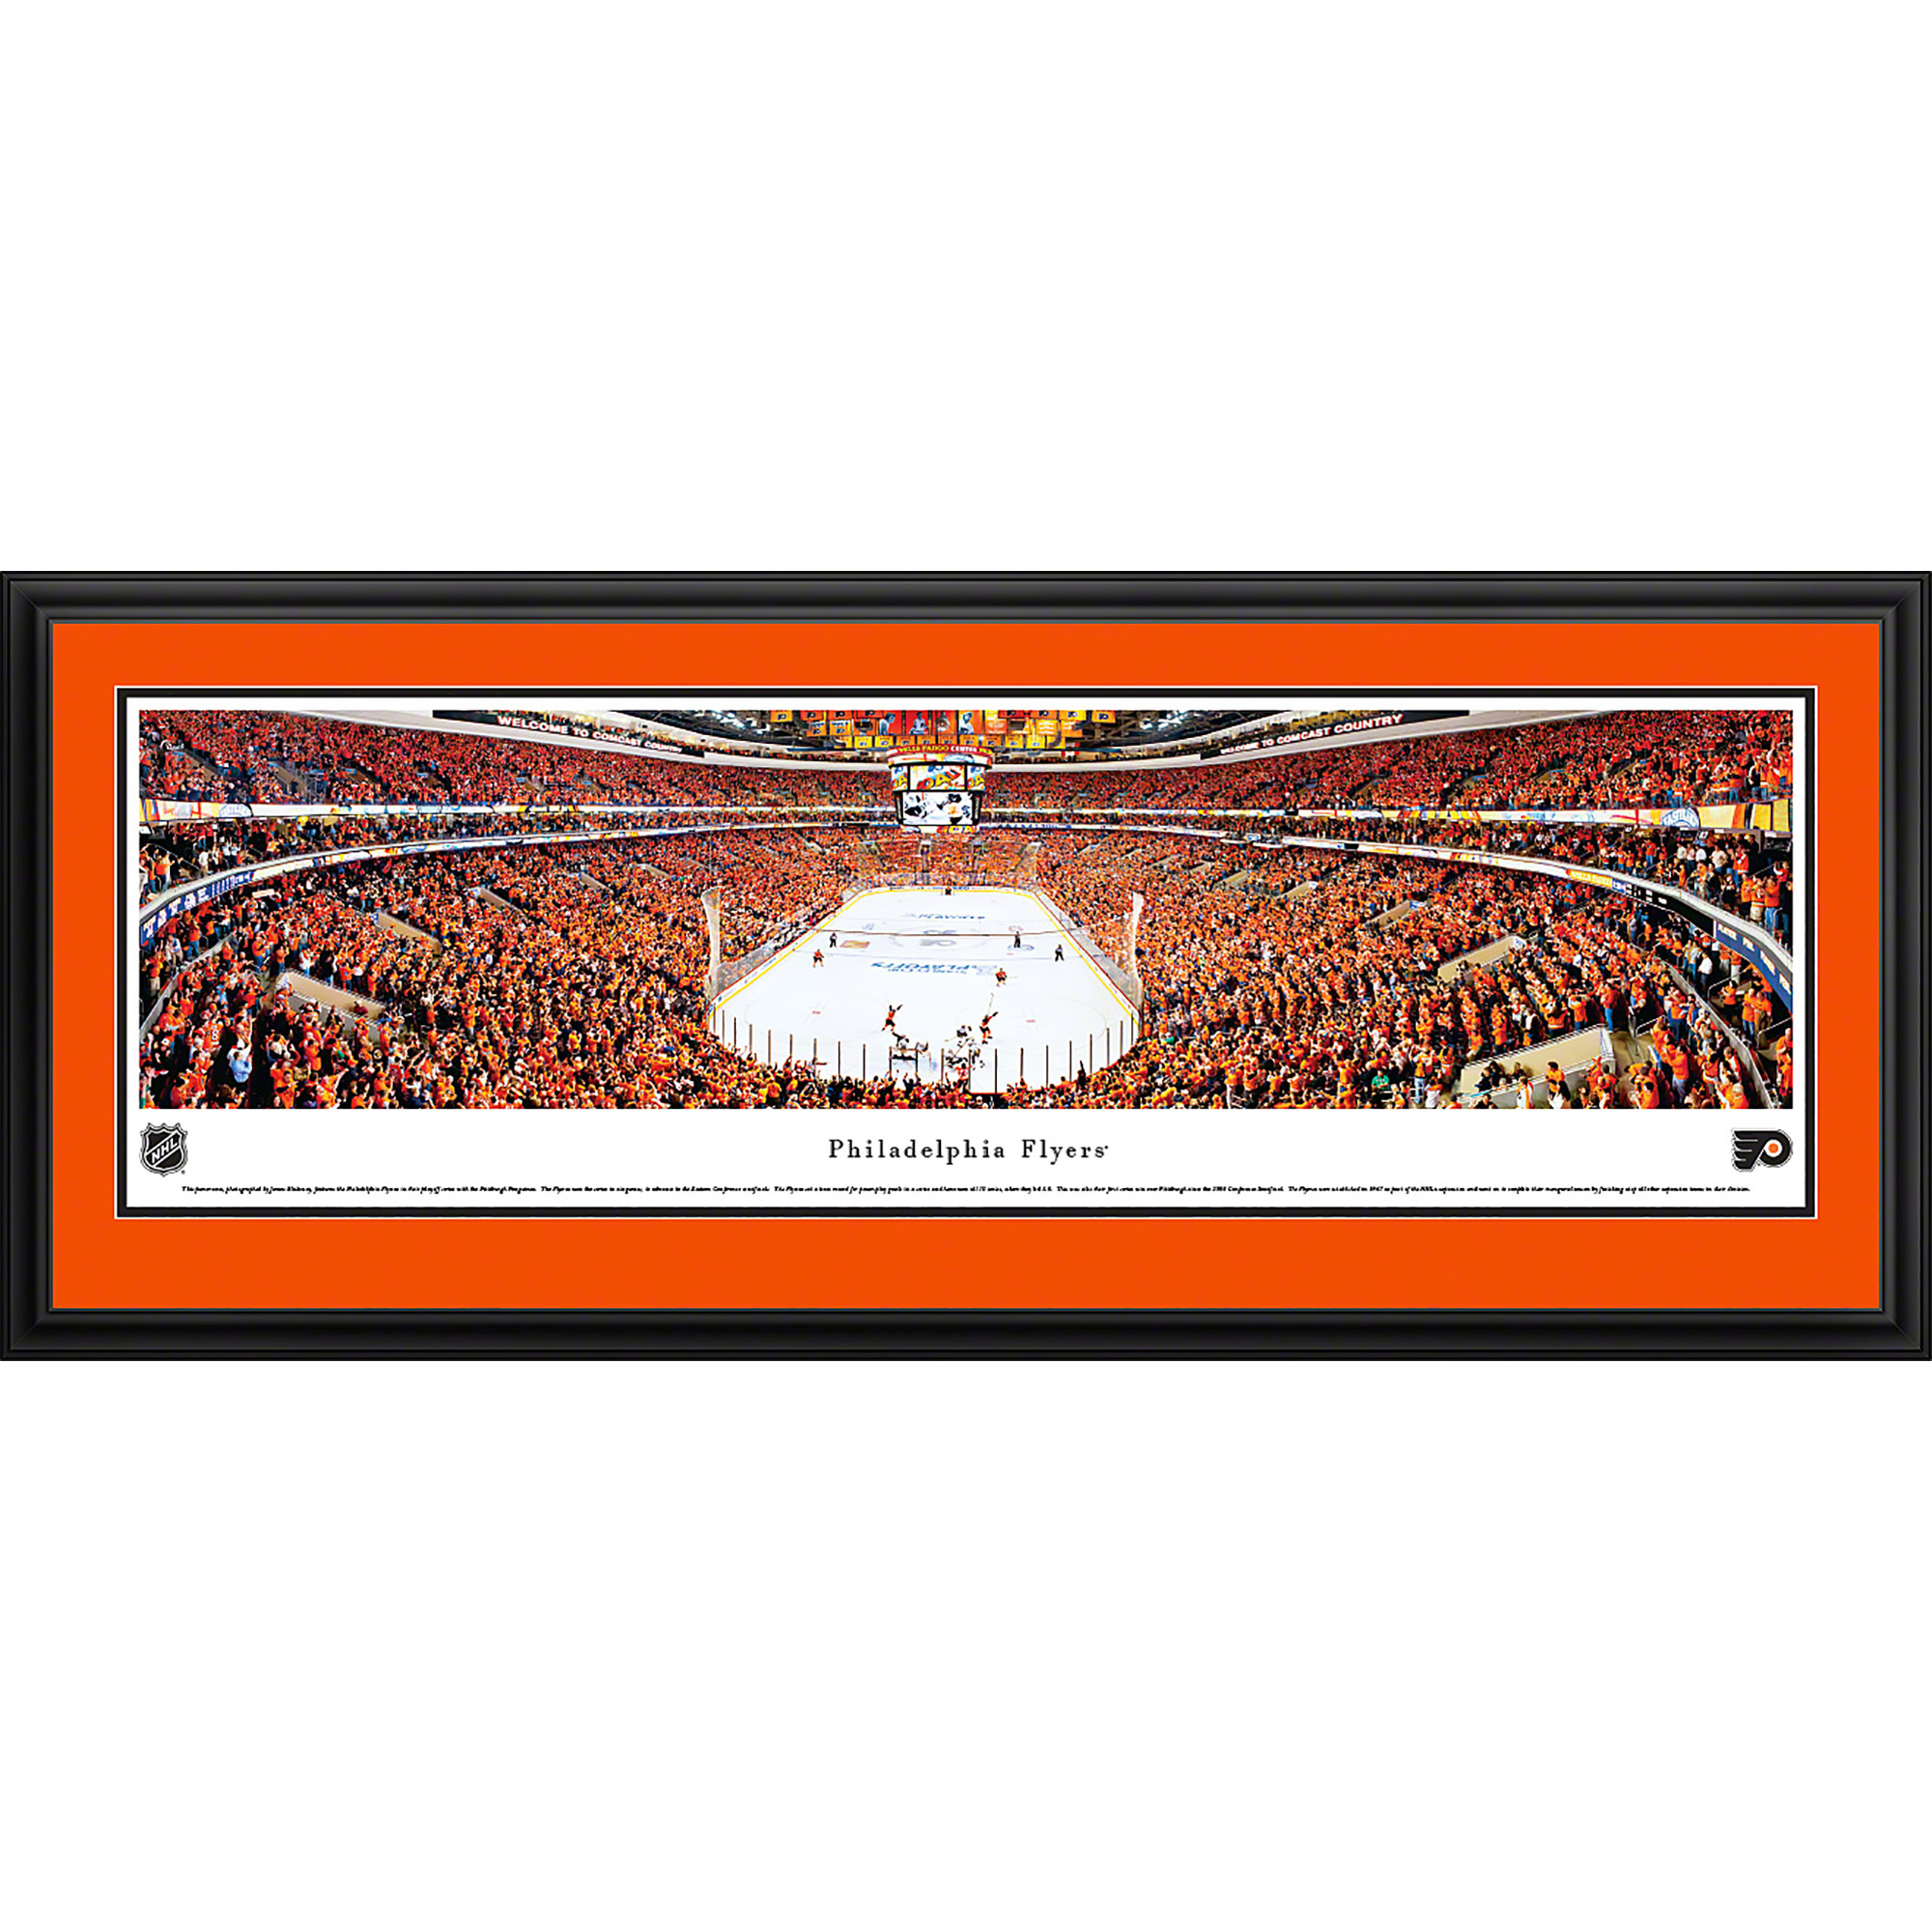 Philadelphia Flyers - End Ice View at Wells Fargo Center - Blakeway Panoramas NHL Print with Deluxe Frame and Double Mat - image 1 of 1